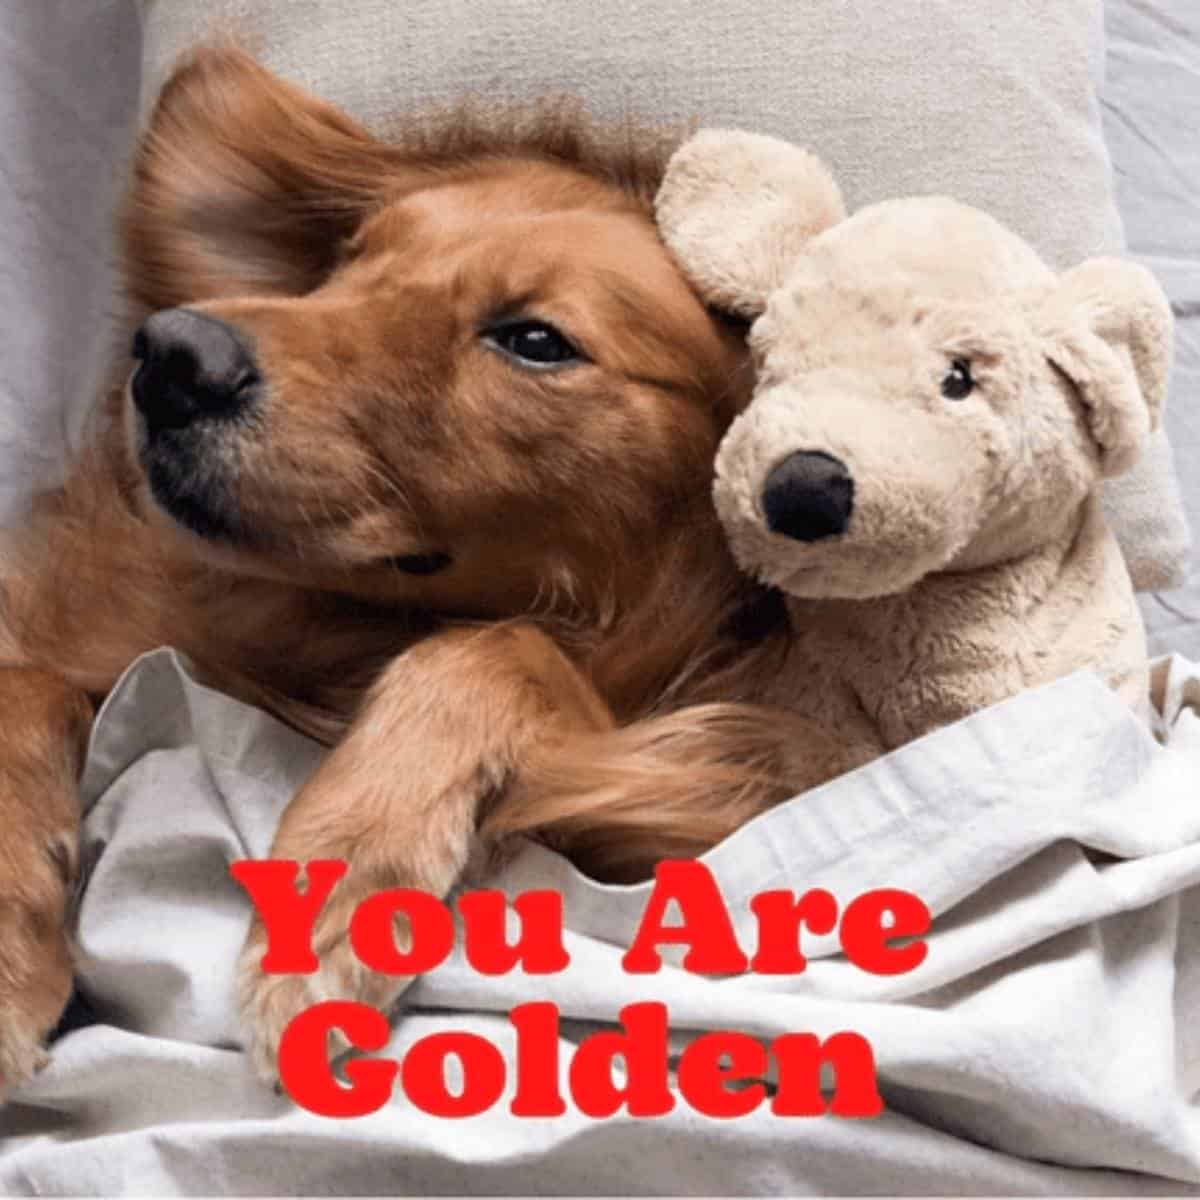 Golden retriever with a white snuggly with a Valentine's saying "you are golden."